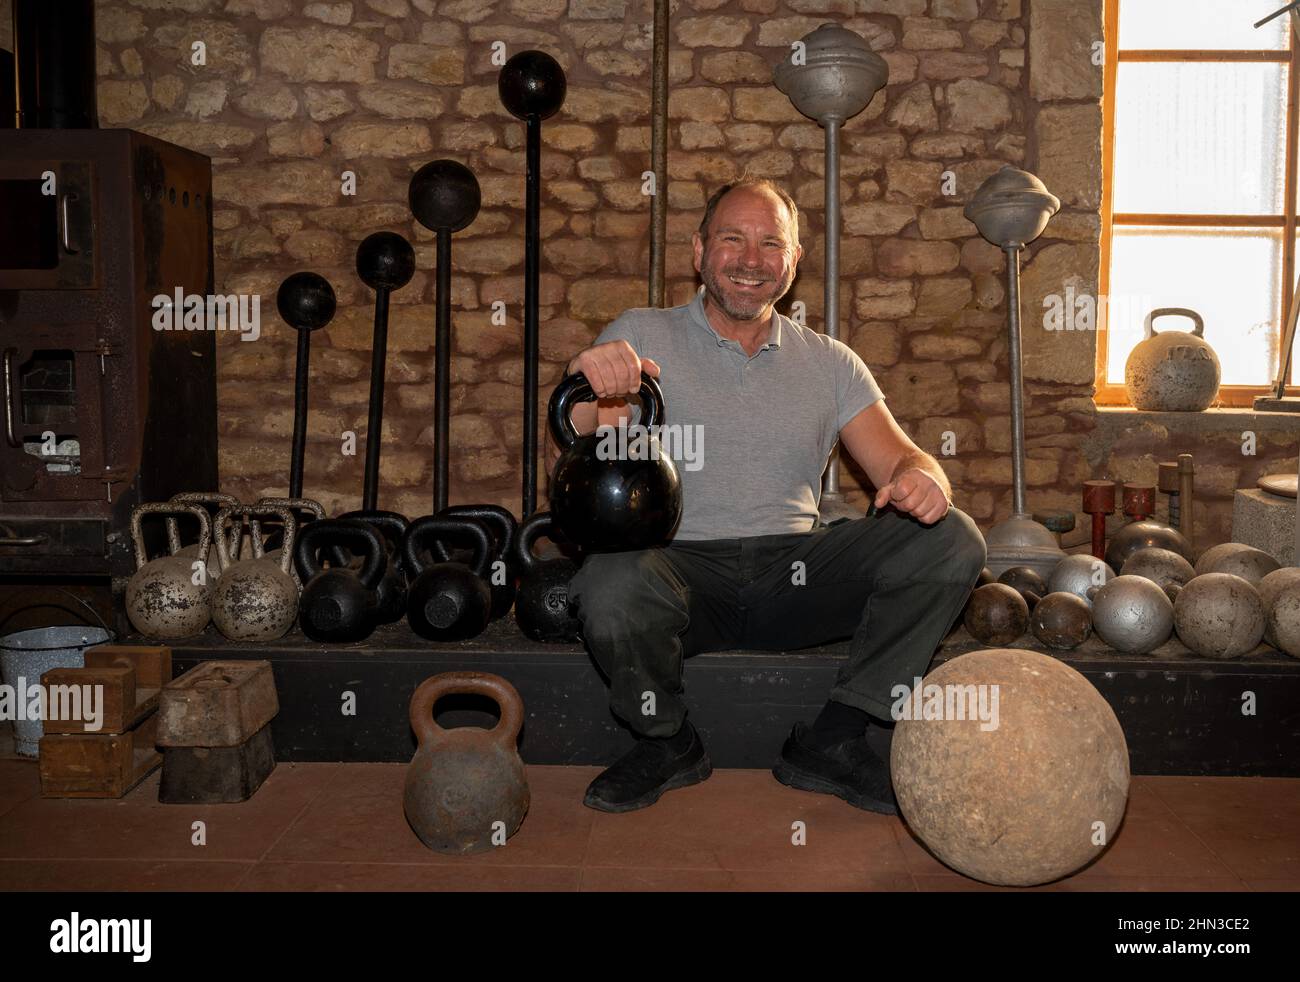 Luxemburg, Luxembourg. 09th Feb, 2021. Georges Christen squats in front of historic dumbbells and weights in his training barn. The Luxembourger is one of the strongest men in the world: he has 26 entries in the Guinness Book of Records. In just a few seconds, he tears up telephone books or bends thick nails. (to dpa: Georges Christen: The man who rolls up pans) Credit: Harald Tittel/dpa/Alamy Live News Stock Photo